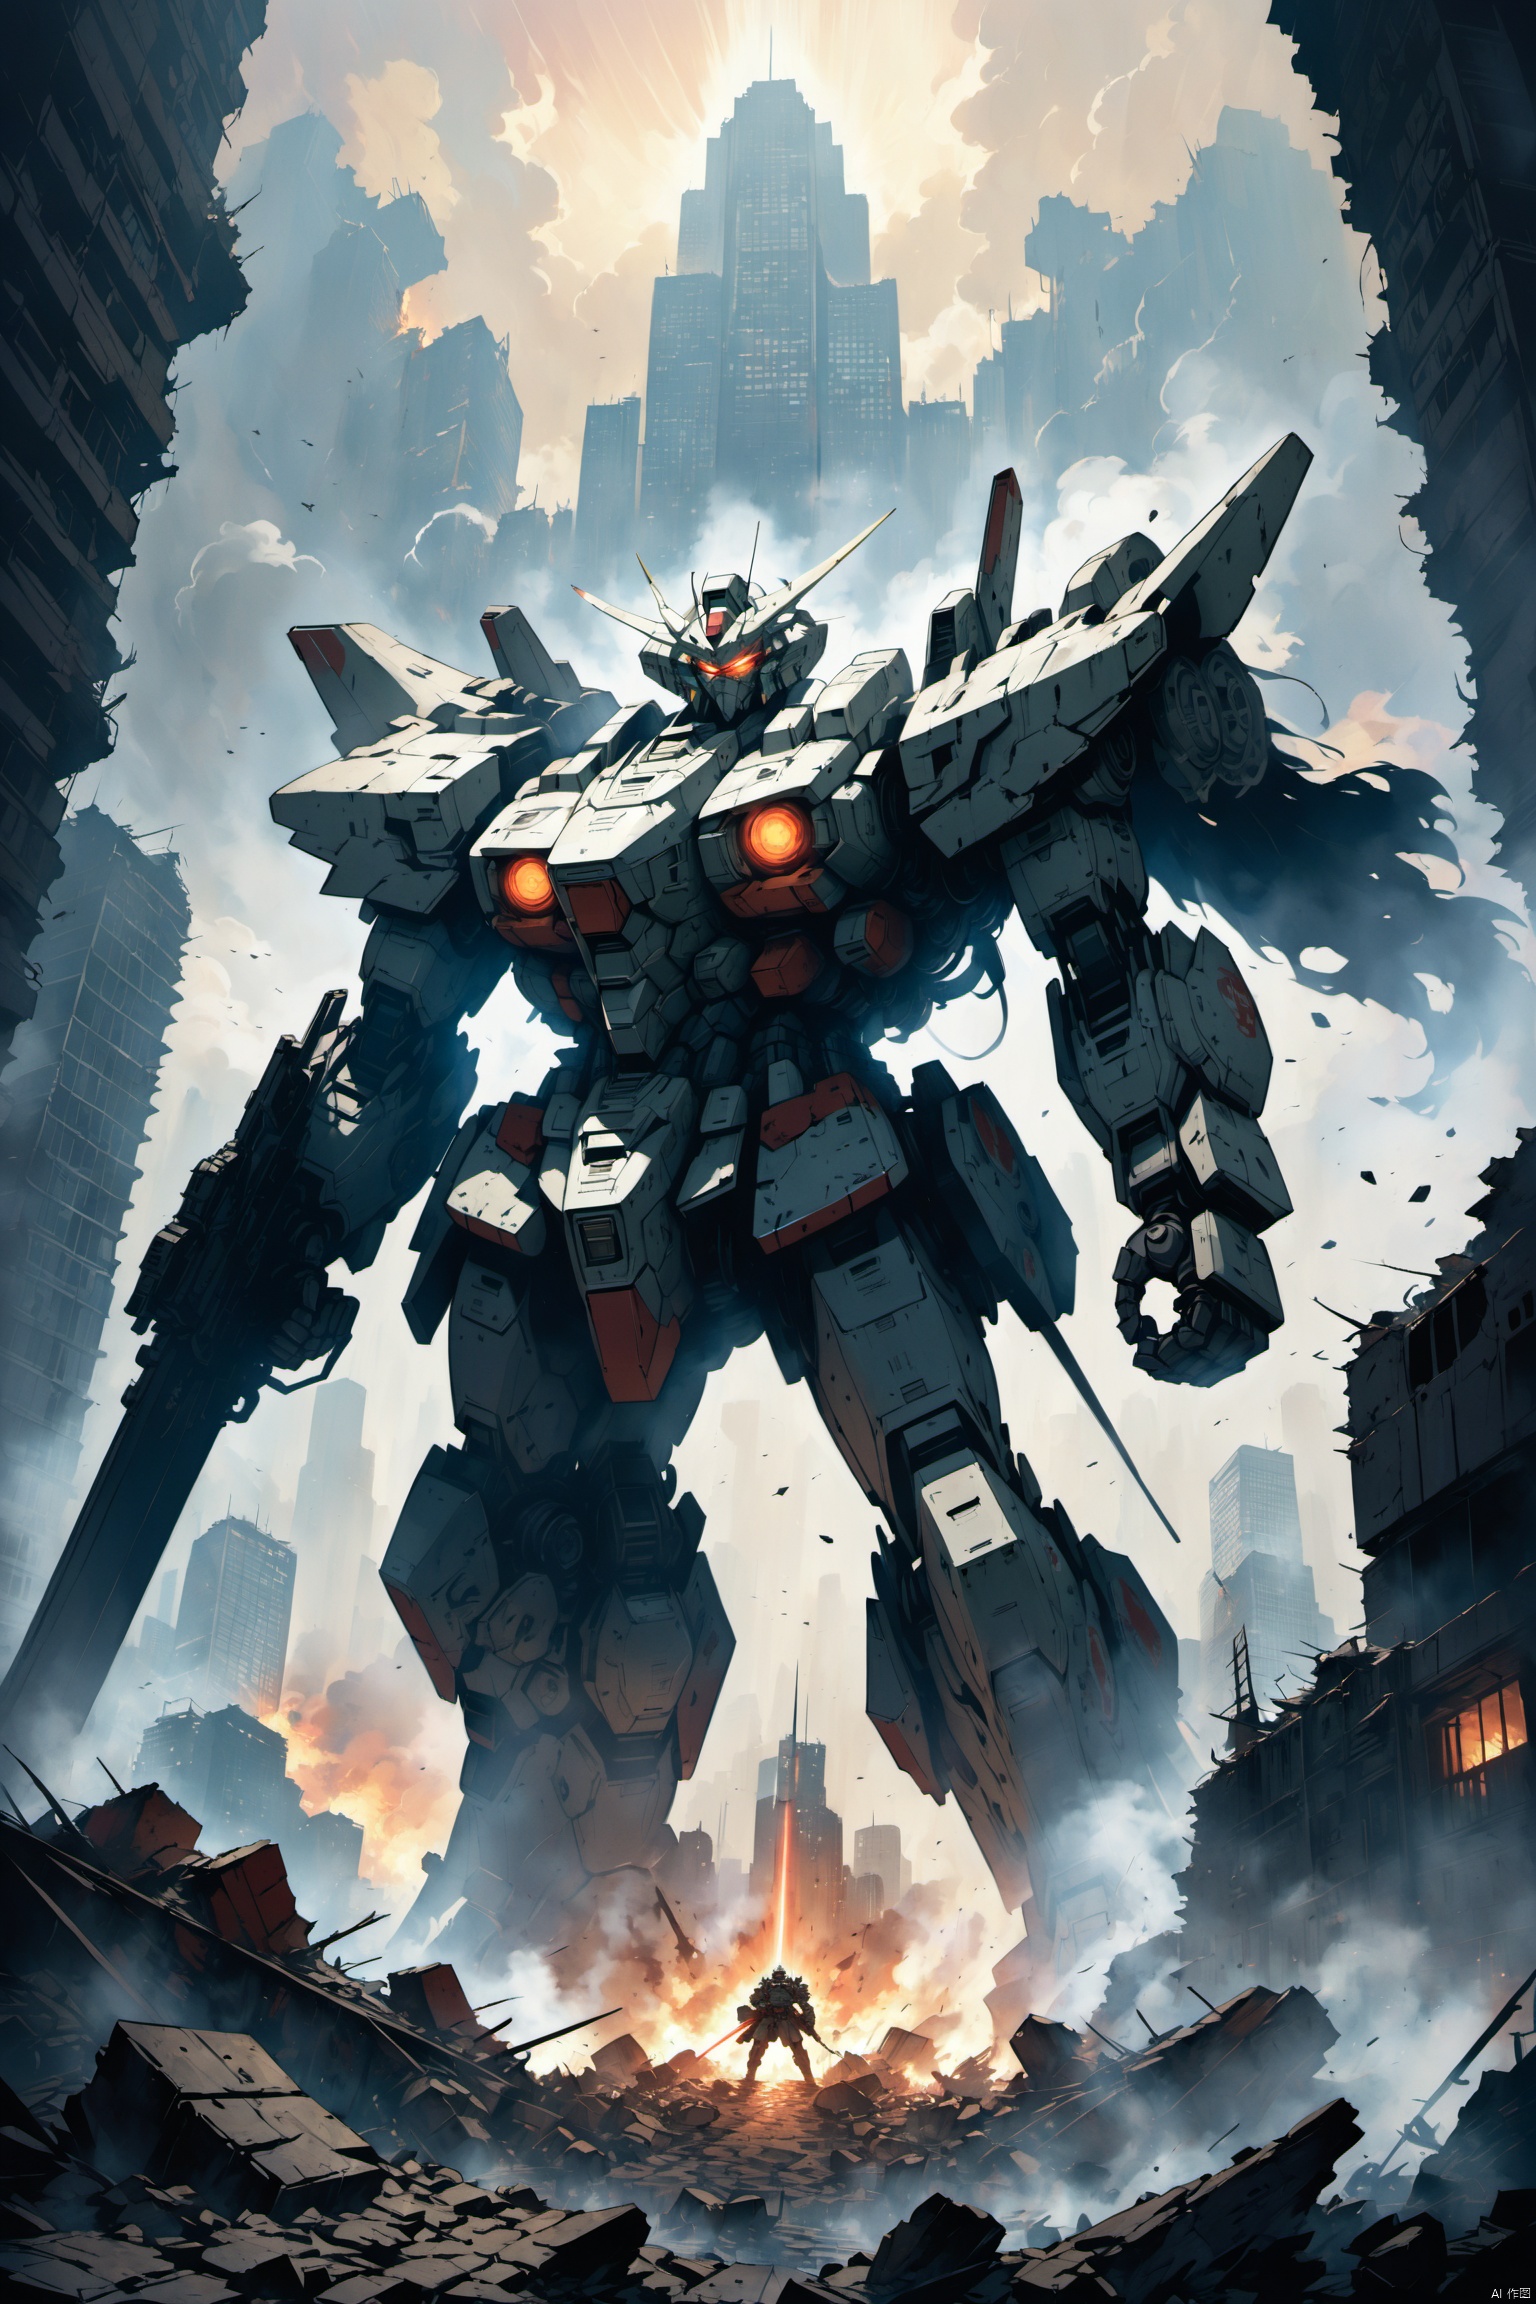 1giant mecha Gundam, full-body rendering, massive scale as it stands triumphantly over a ruined cityscape, detailed armor plating with battle scars, iconic head design featuring expressive eyes and sensor arrays, articulated joints capable of swift and precise movements, formidable array of weapons including beam sabers, shield, and missile launchers, internal pilot visible through cockpit viewport, mechanized footprints crushing the rubble beneath, smoke rising from recent conflict, partially destroyed skyscrapers forming an apocalyptic backdrop, dramatic lighting emphasizing its awe-inspiring presence, symbolic of power, resilience, and the eternal struggle for peace or domination in a world ravaged by war,((anime art style)), ((poakl)), eastern mythology